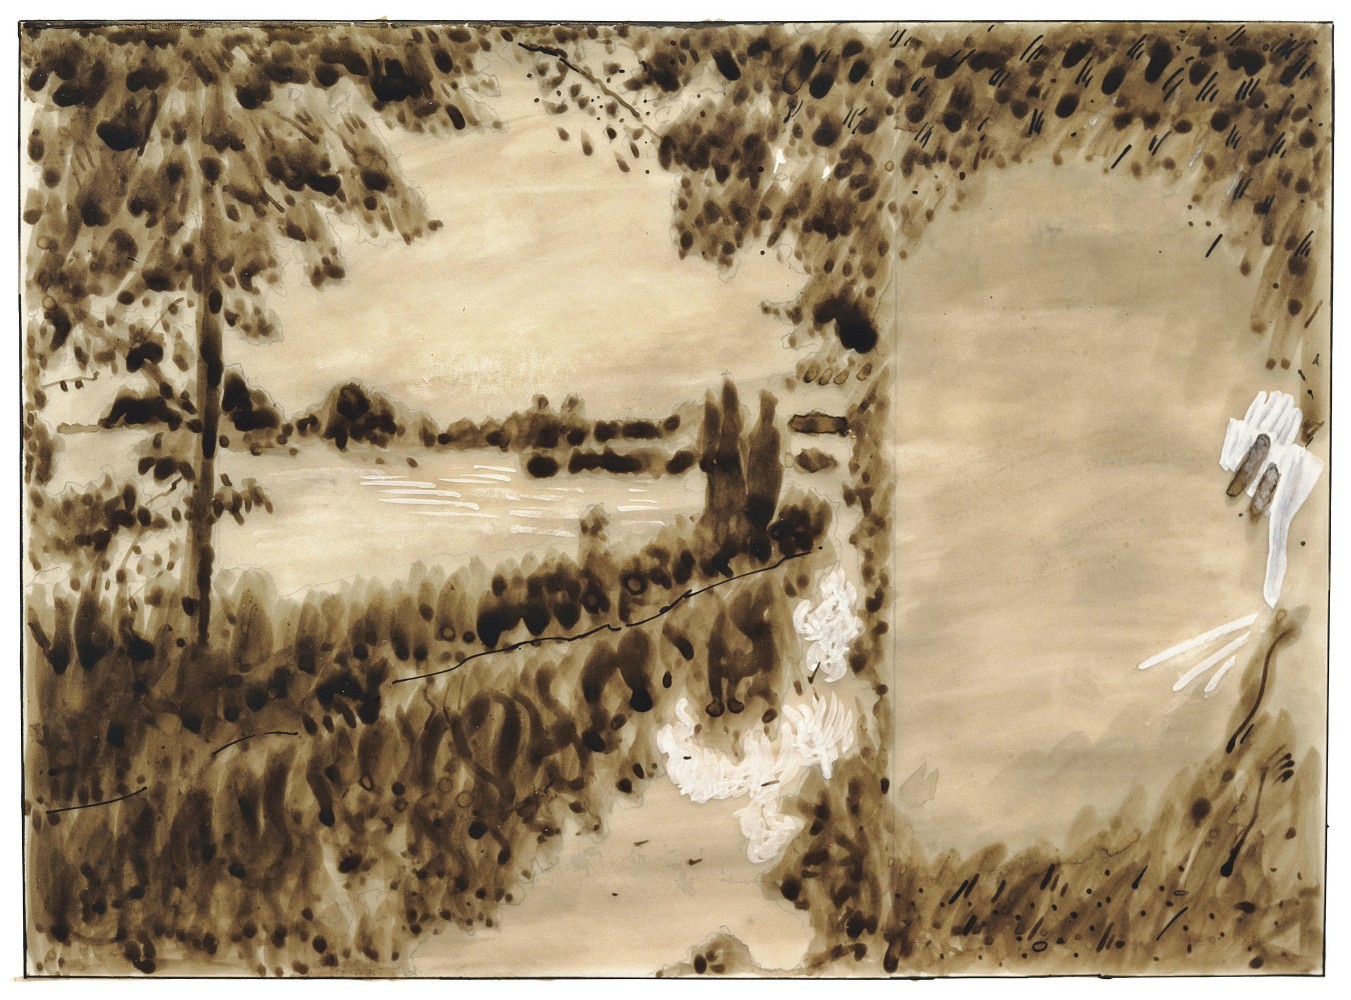 Door to the River Study #3

Pencil, ink and gouache on paper,&amp;nbsp;6 x 9&amp;quot; 1992